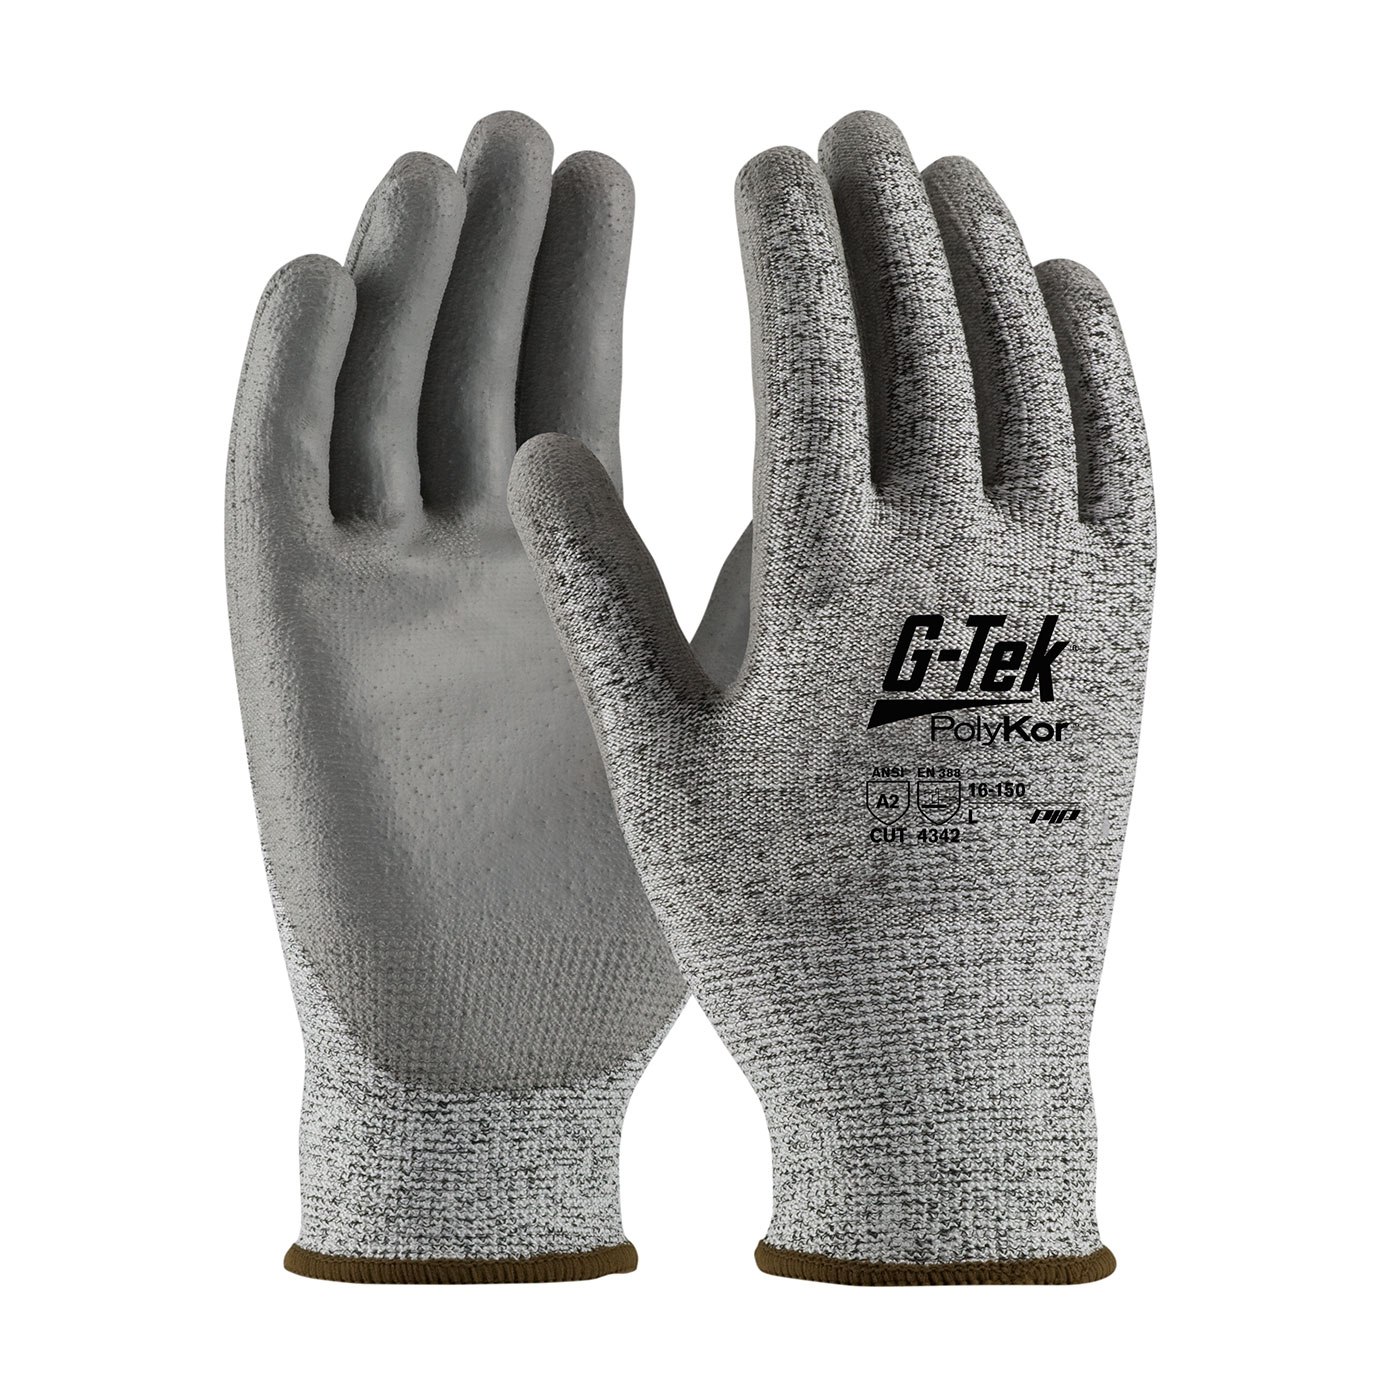 PIP 16-150/XL G-Tek PolyKor Seamless Knit PolyKor Blended Glove with Polyurethane Coated Smooth Grip on Palm & Fingers - X-Large PID-16 150 XL